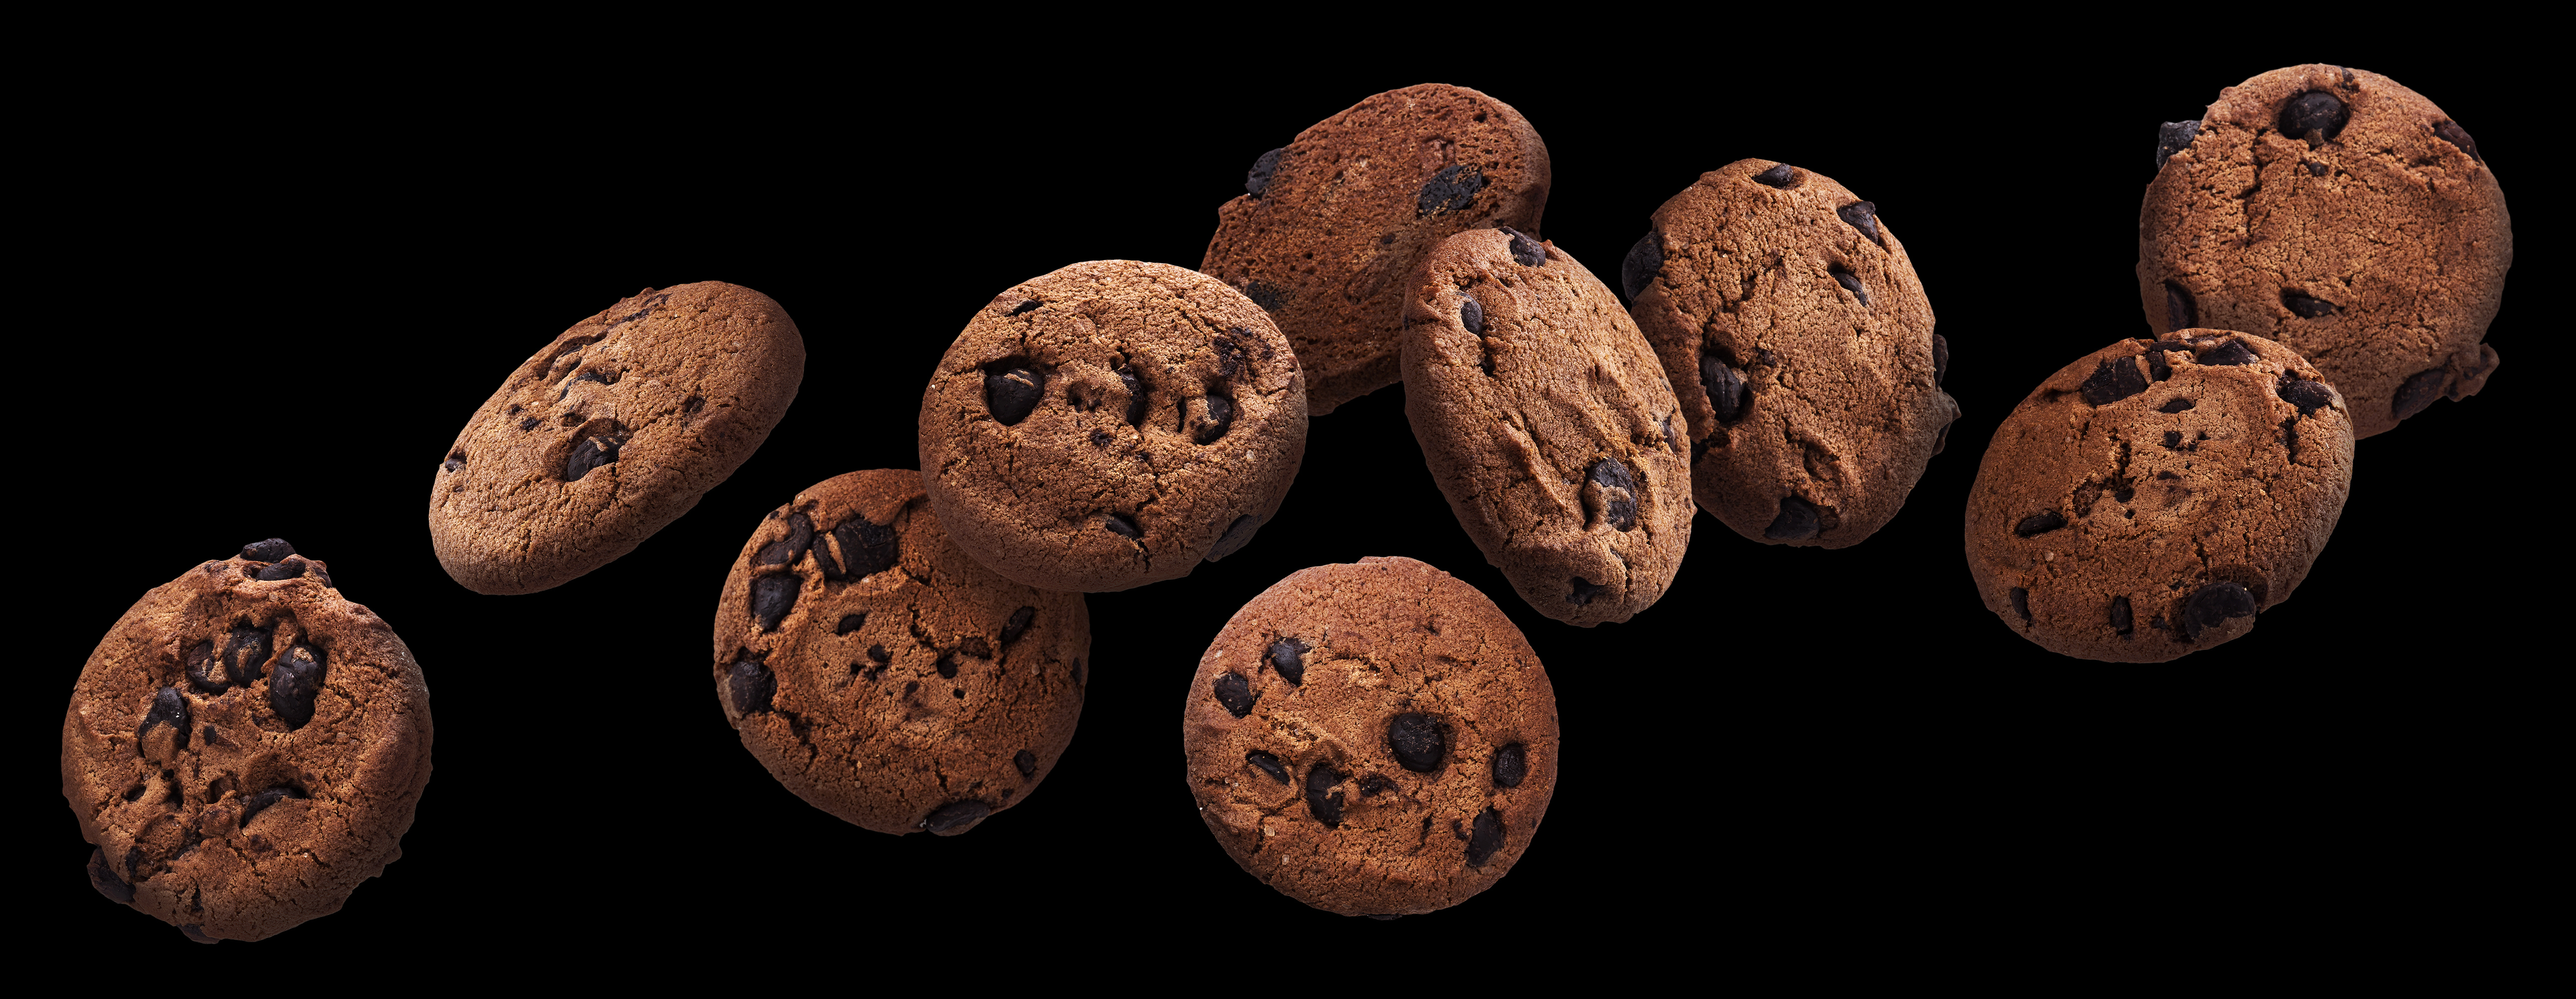 Chocolate chip cookies falling over black background, flying biscuits